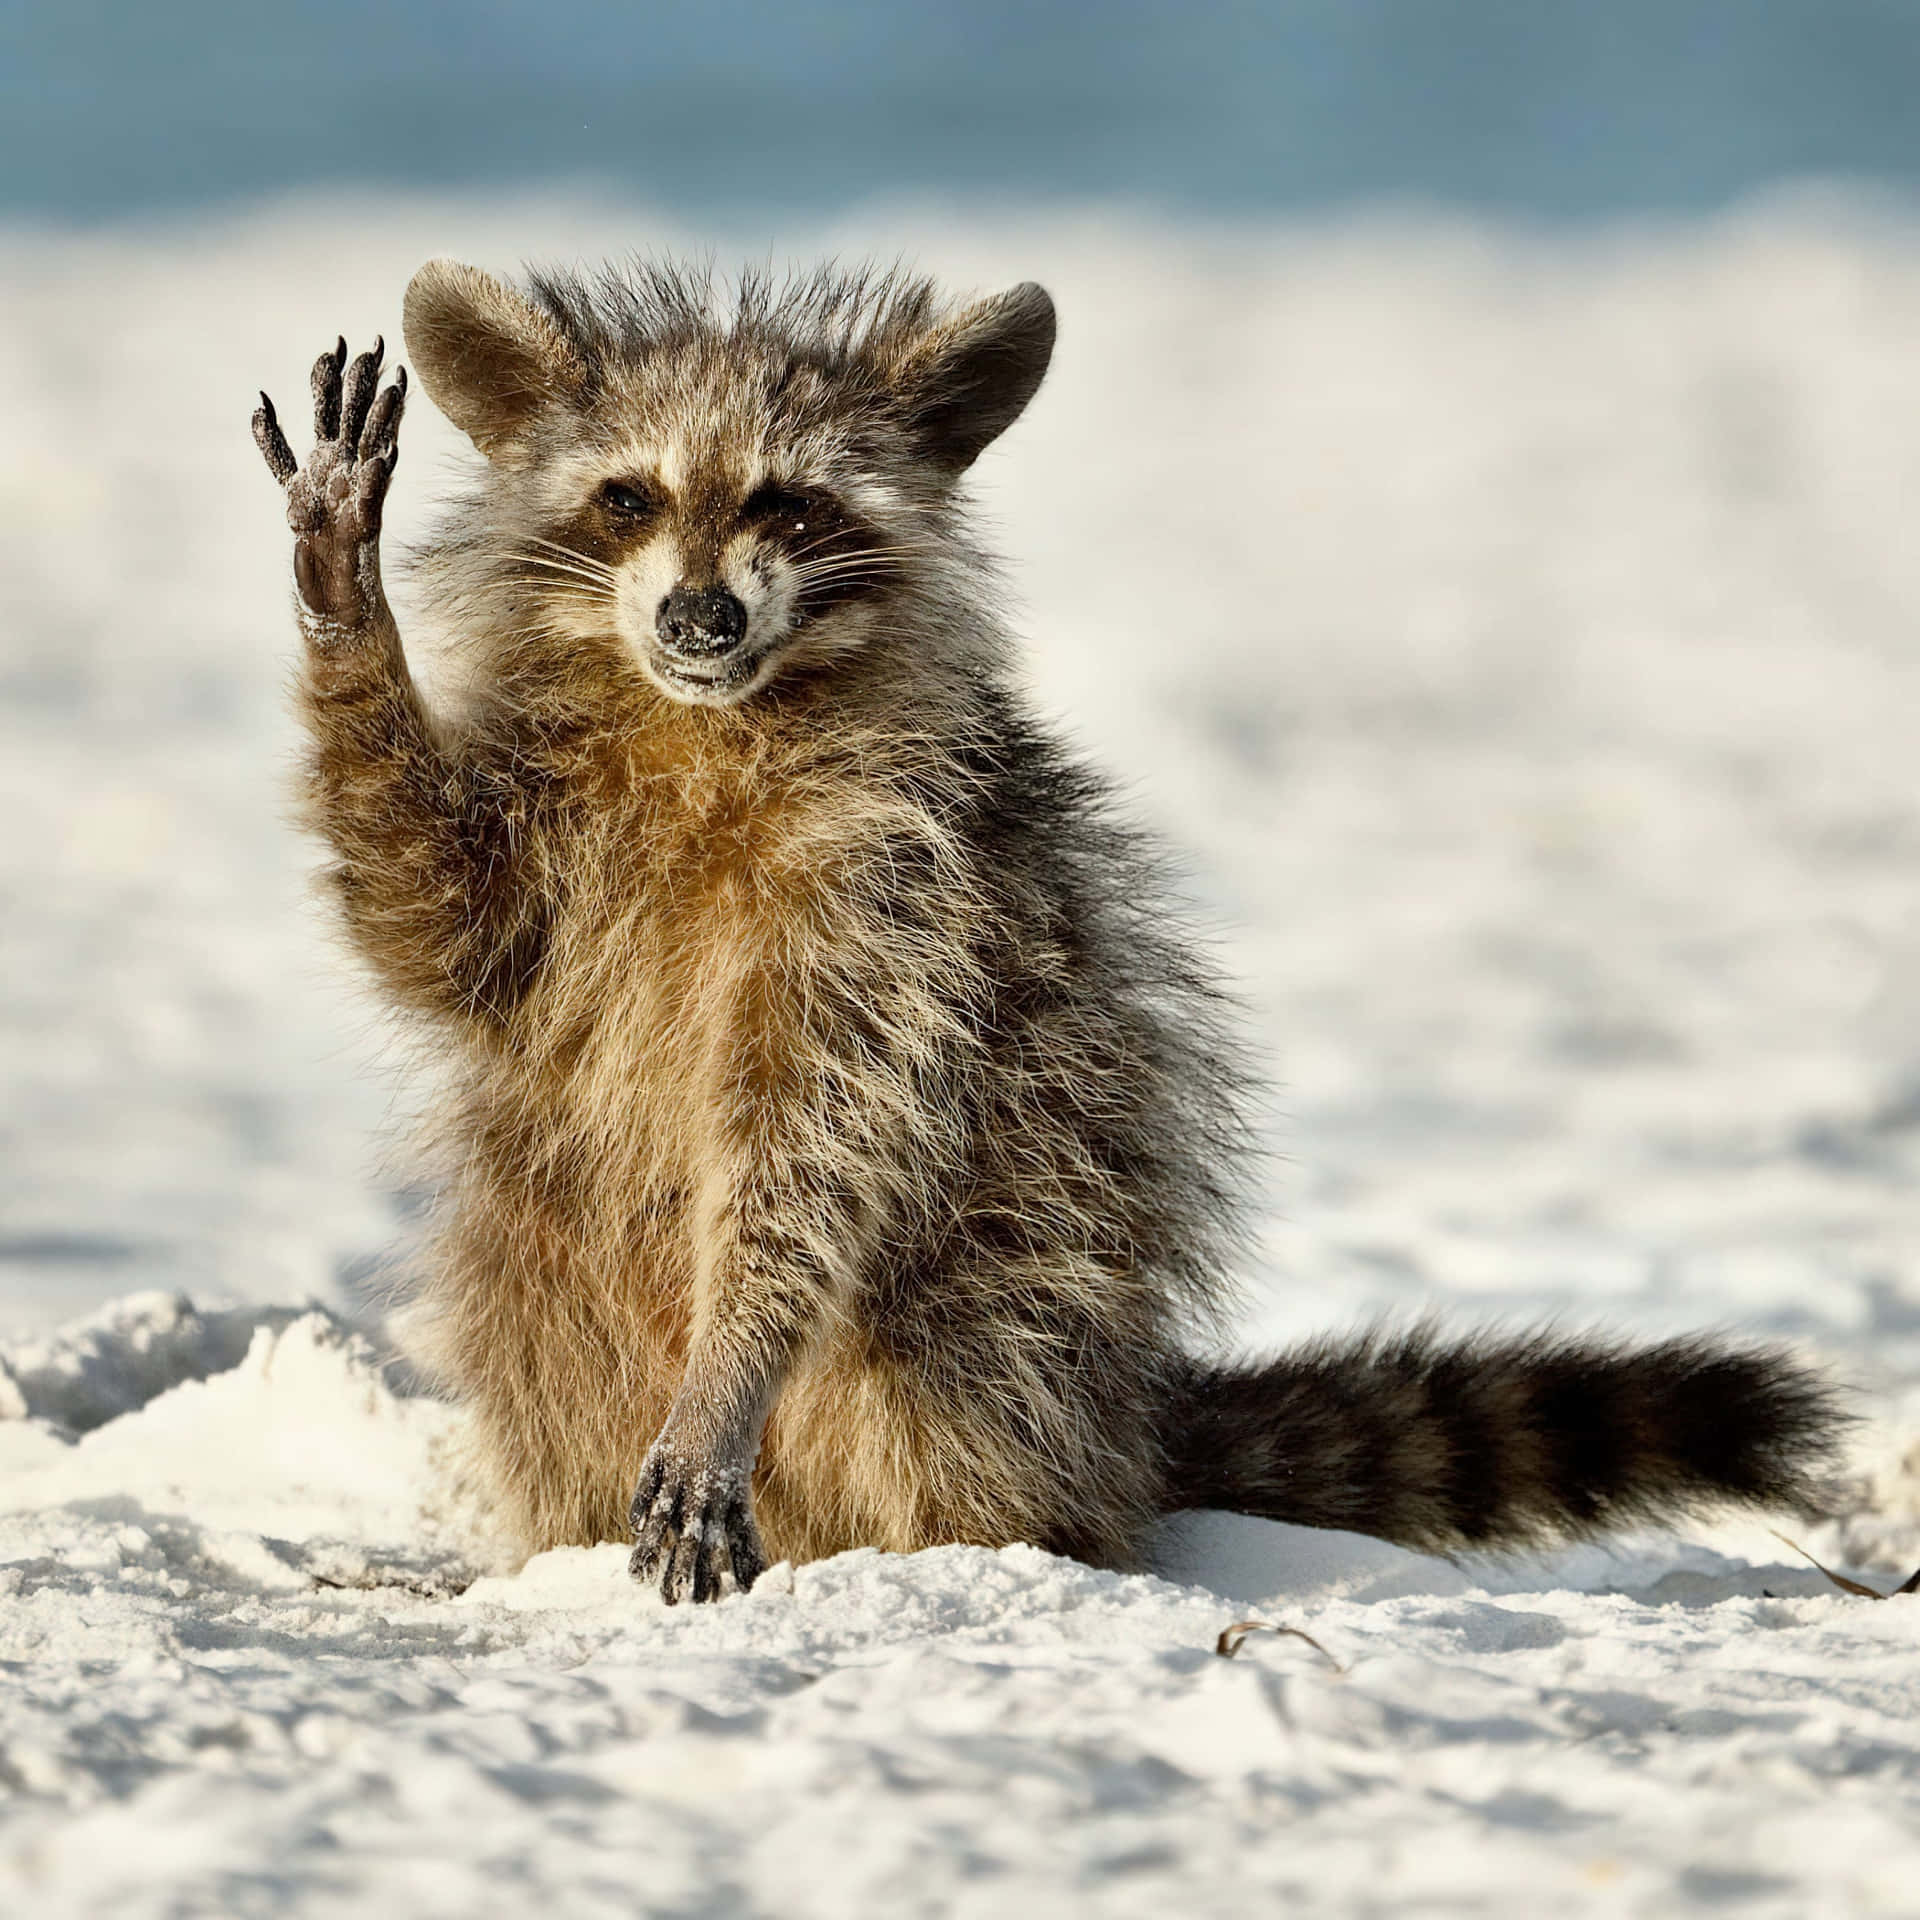 Funny Animal Raccoon Waving On Sand Pictures